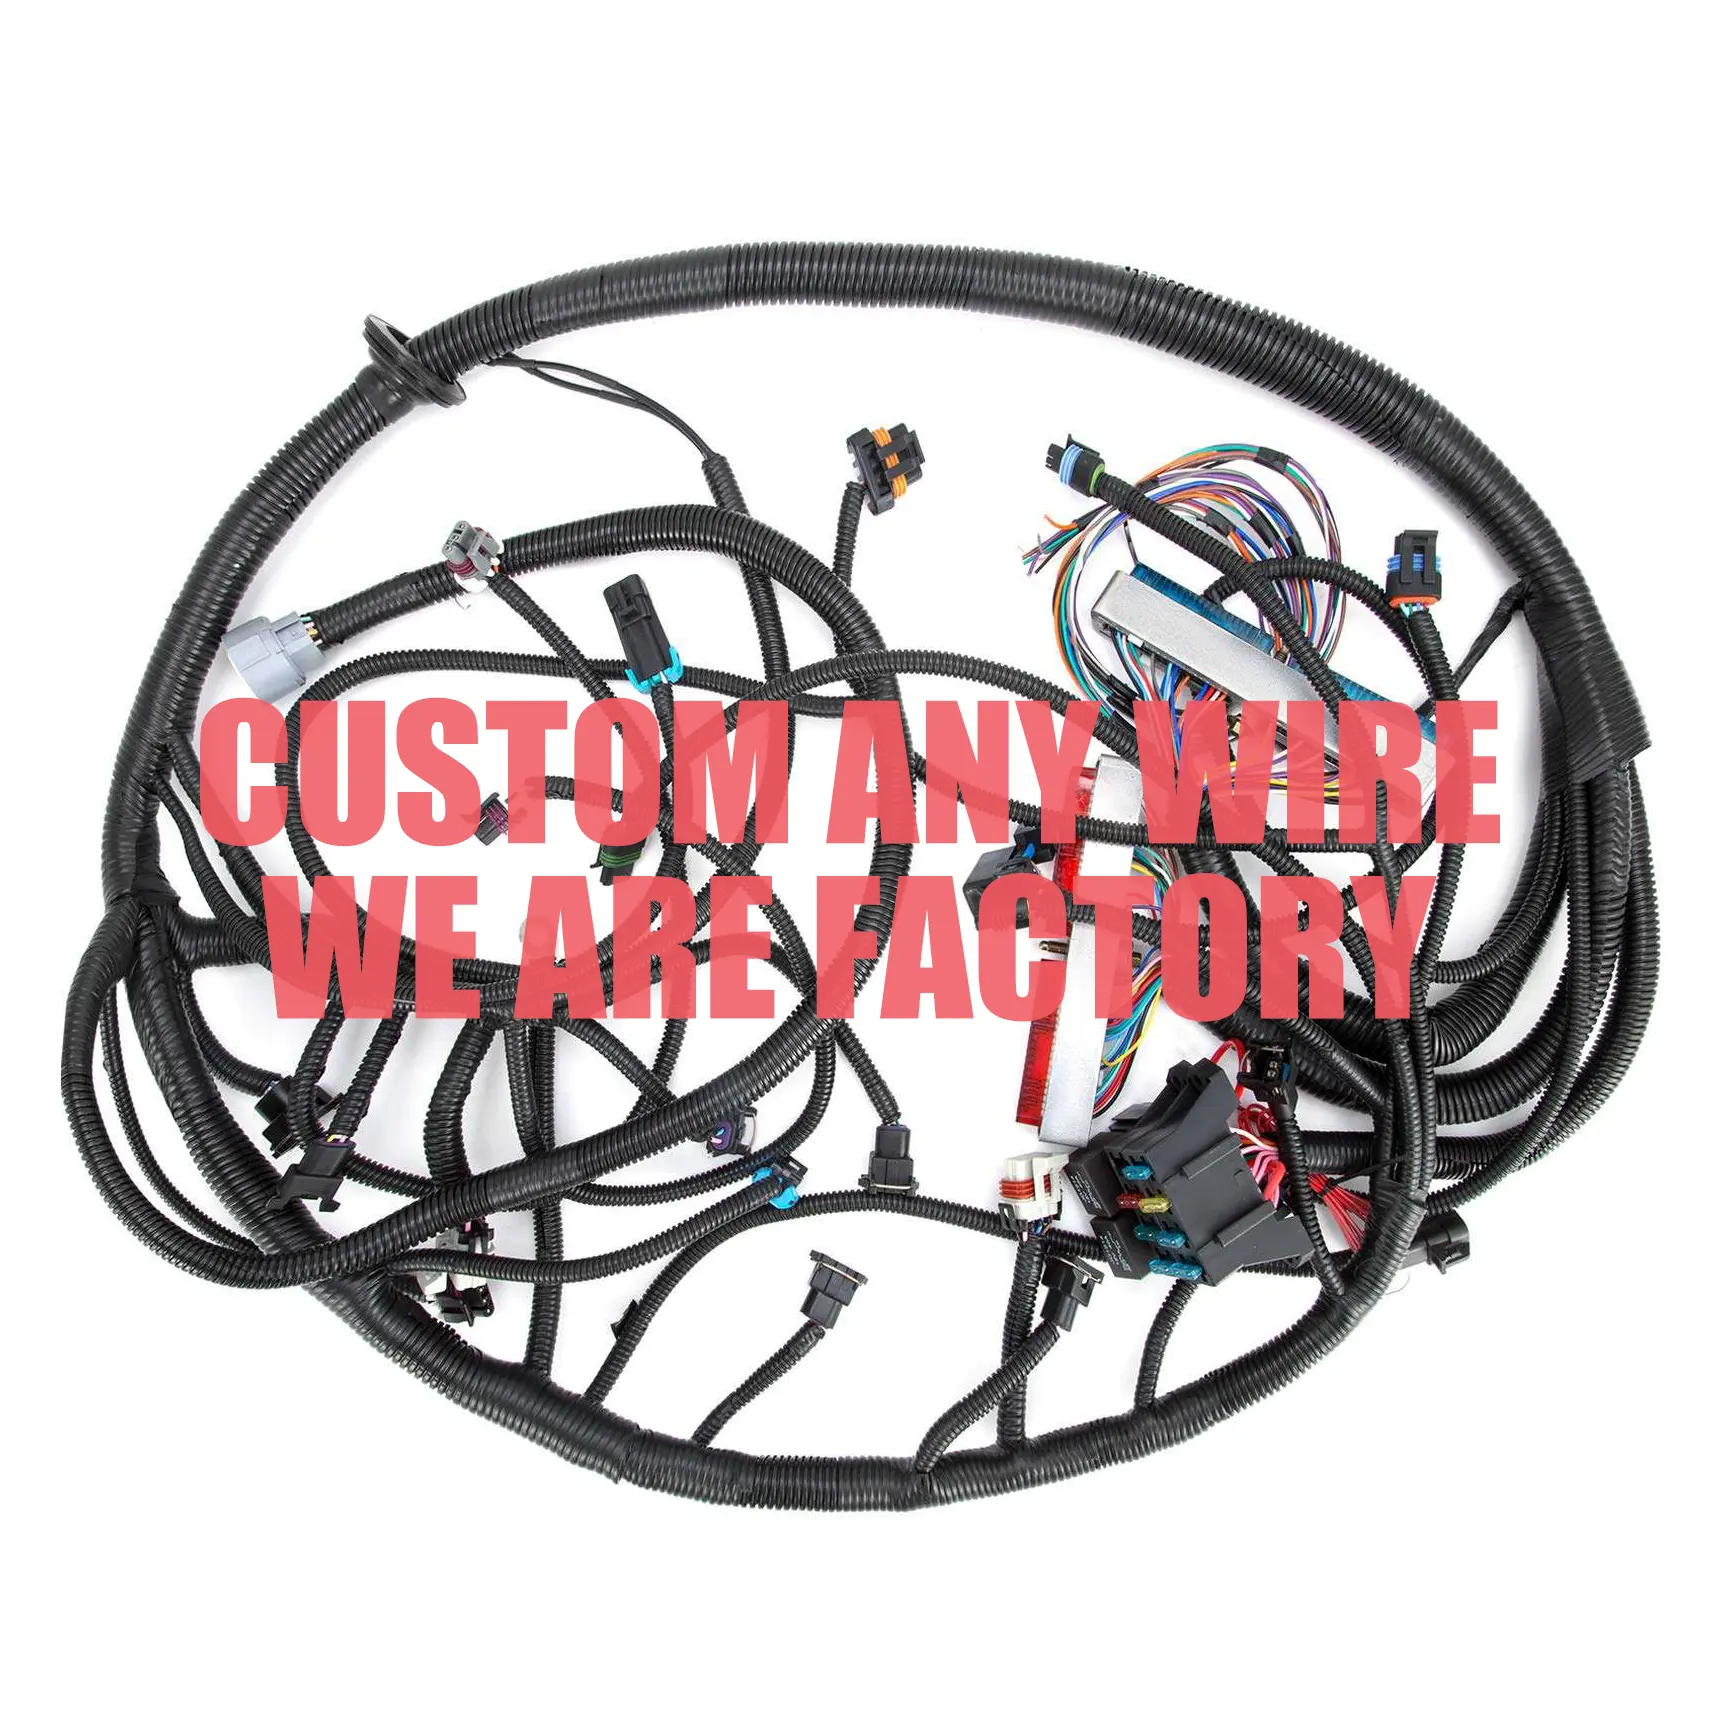 Fuel Hilux Cables Har M11Swap Ls Energy New T-Plug Female Motorcycle Connector Car E46 Auto Wiring Harness for Toyota